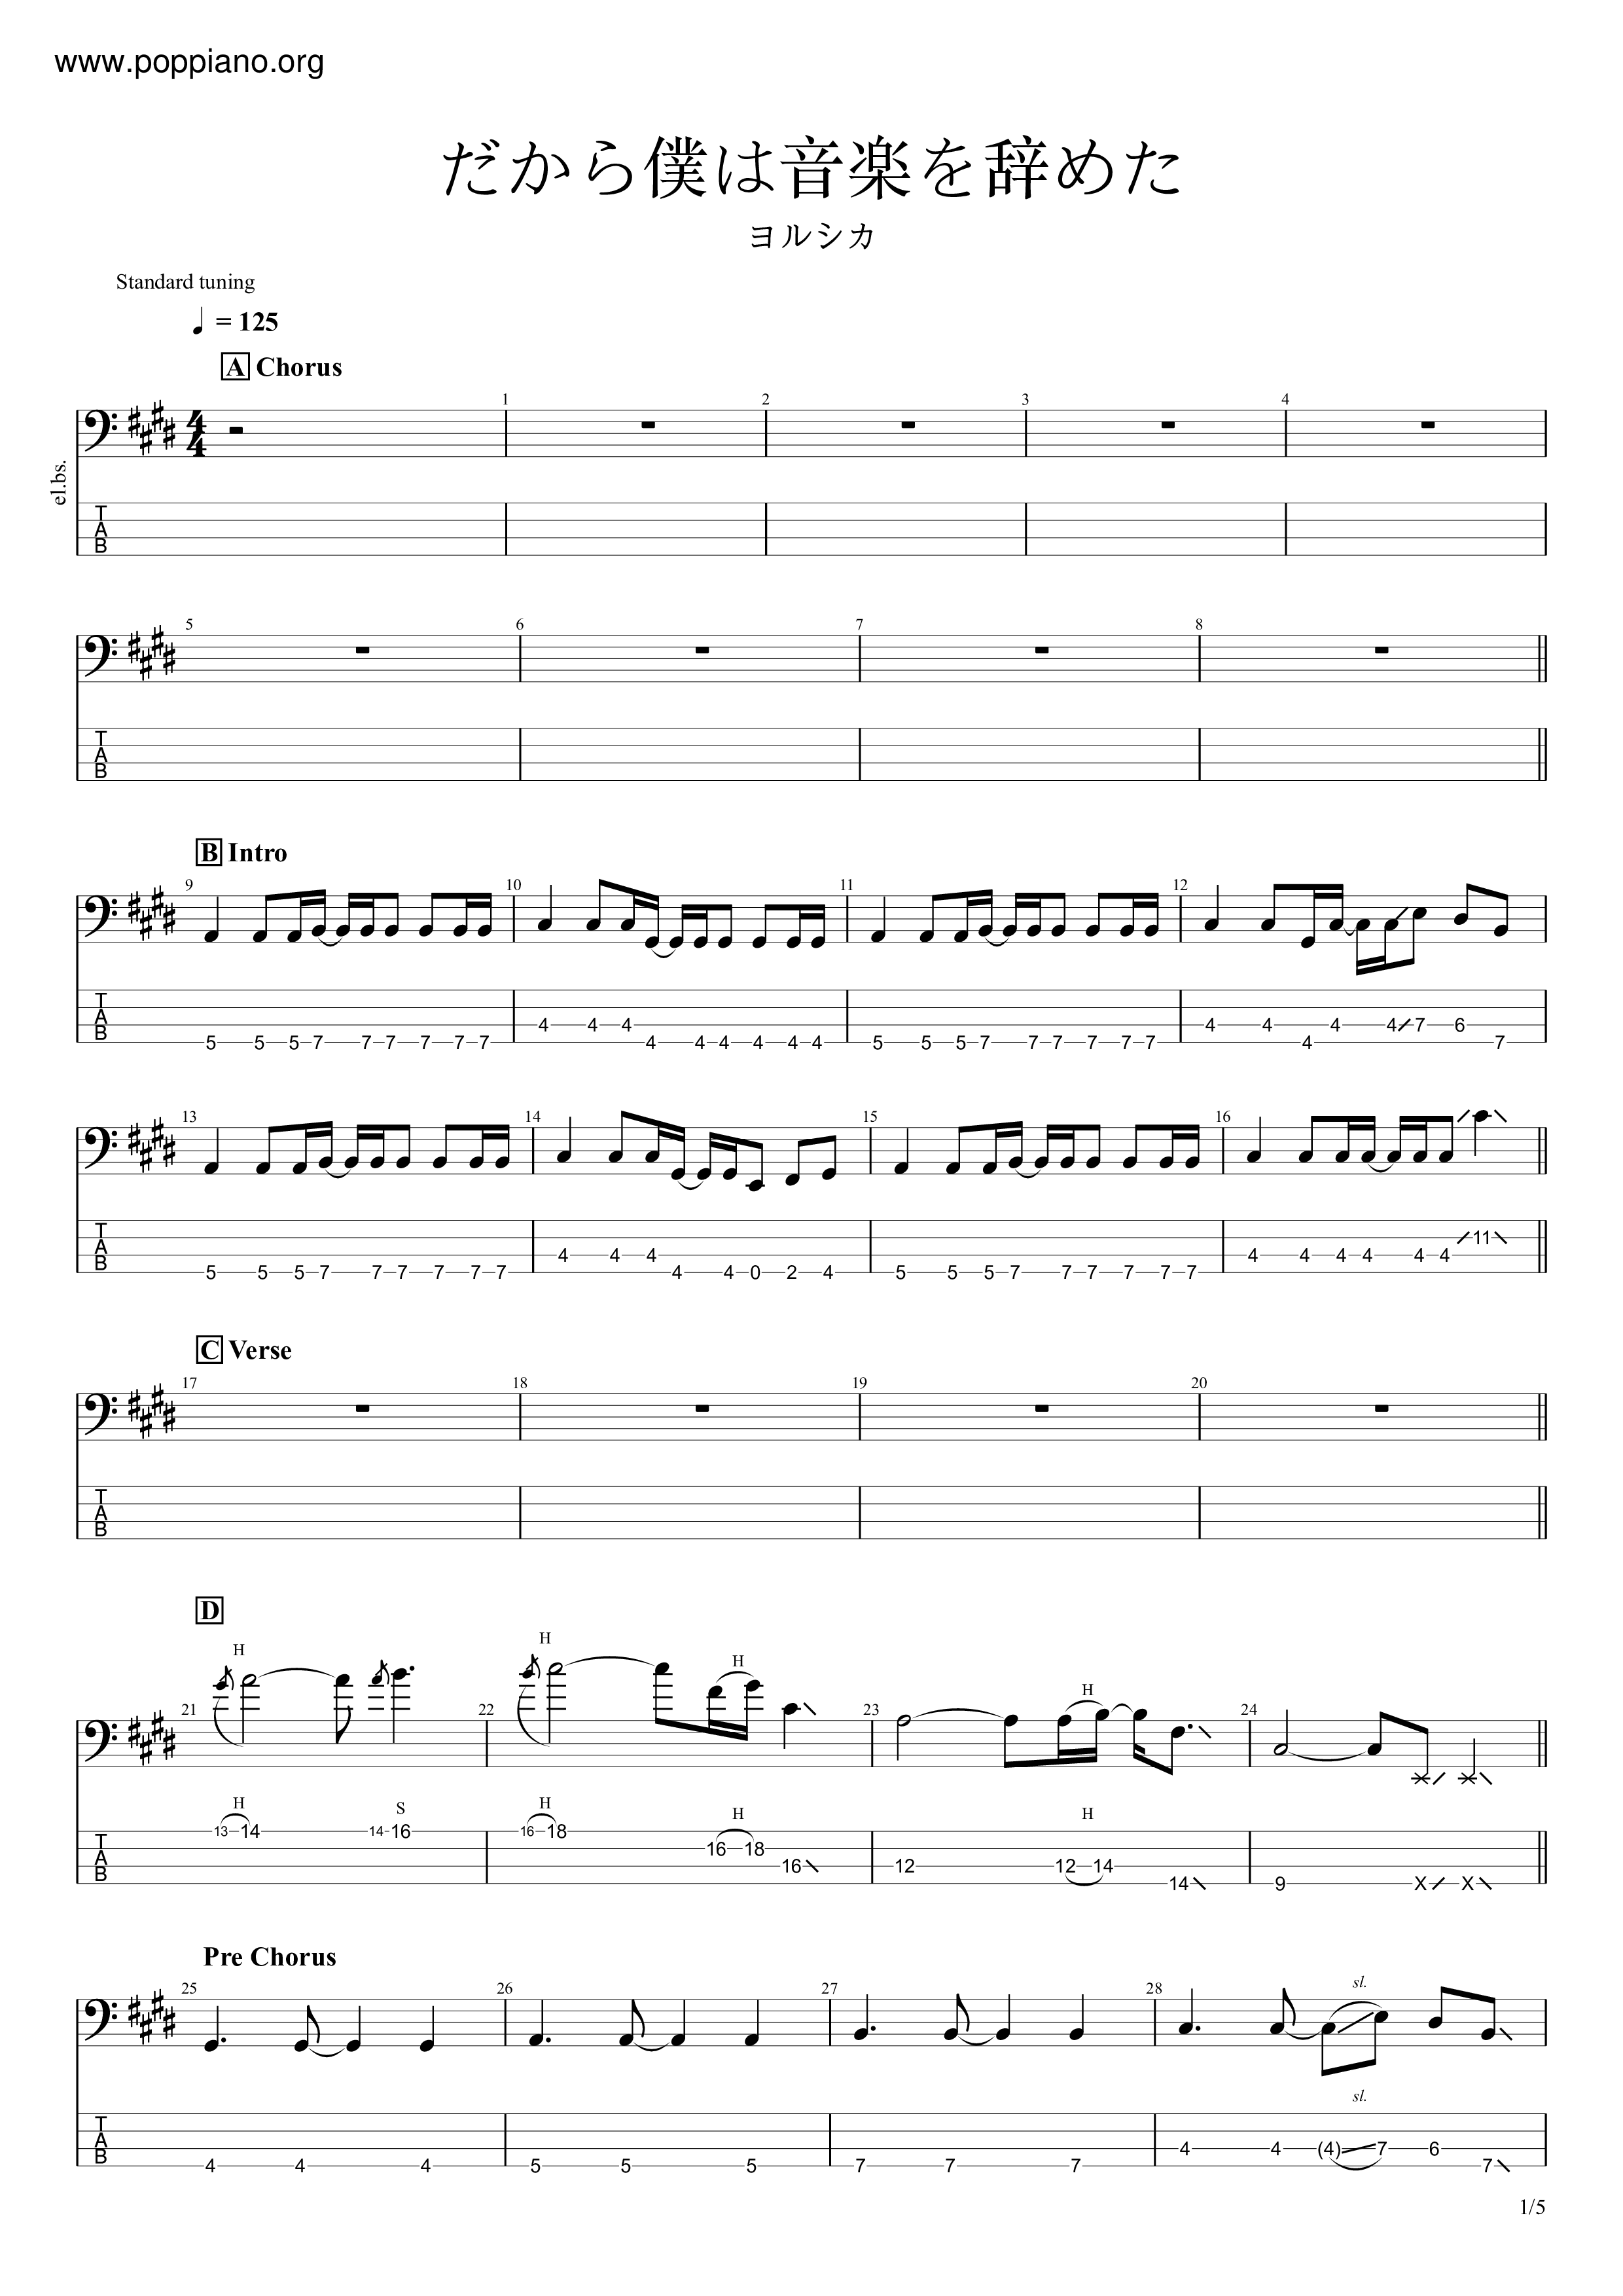 So I Give Up Music Score